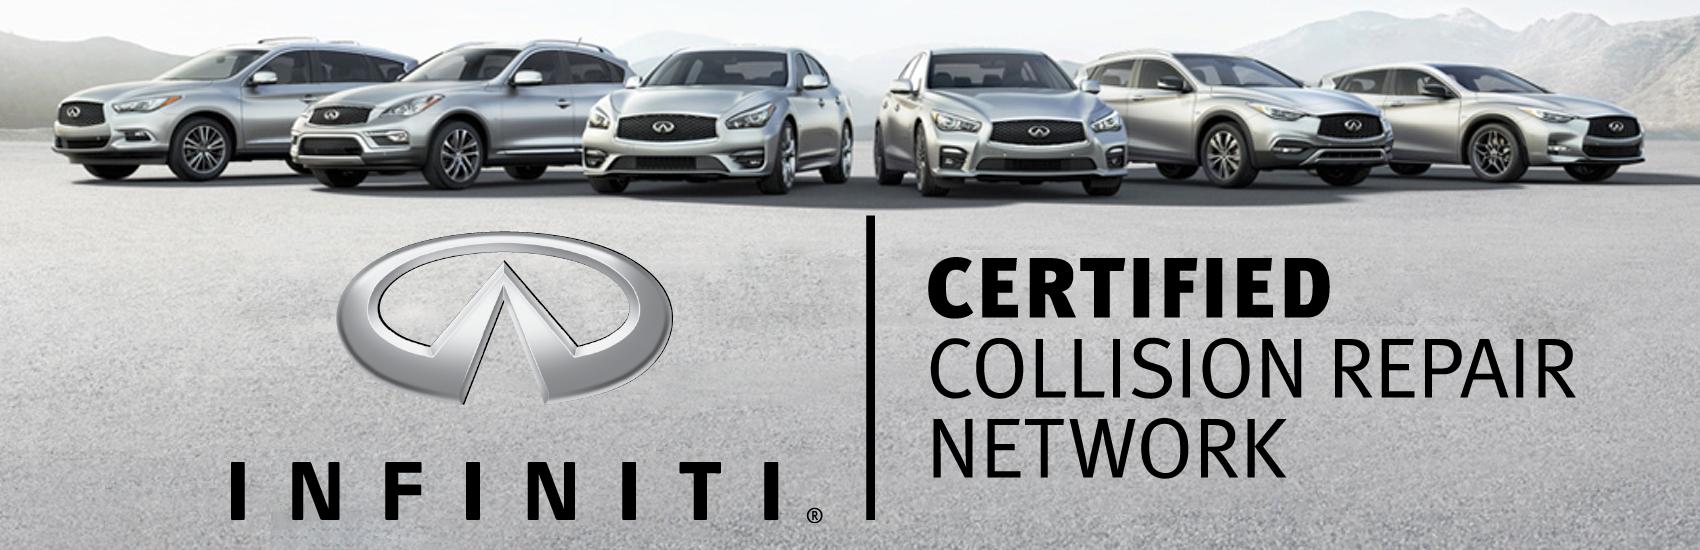 axelrod collision infiniti certified repair specialists